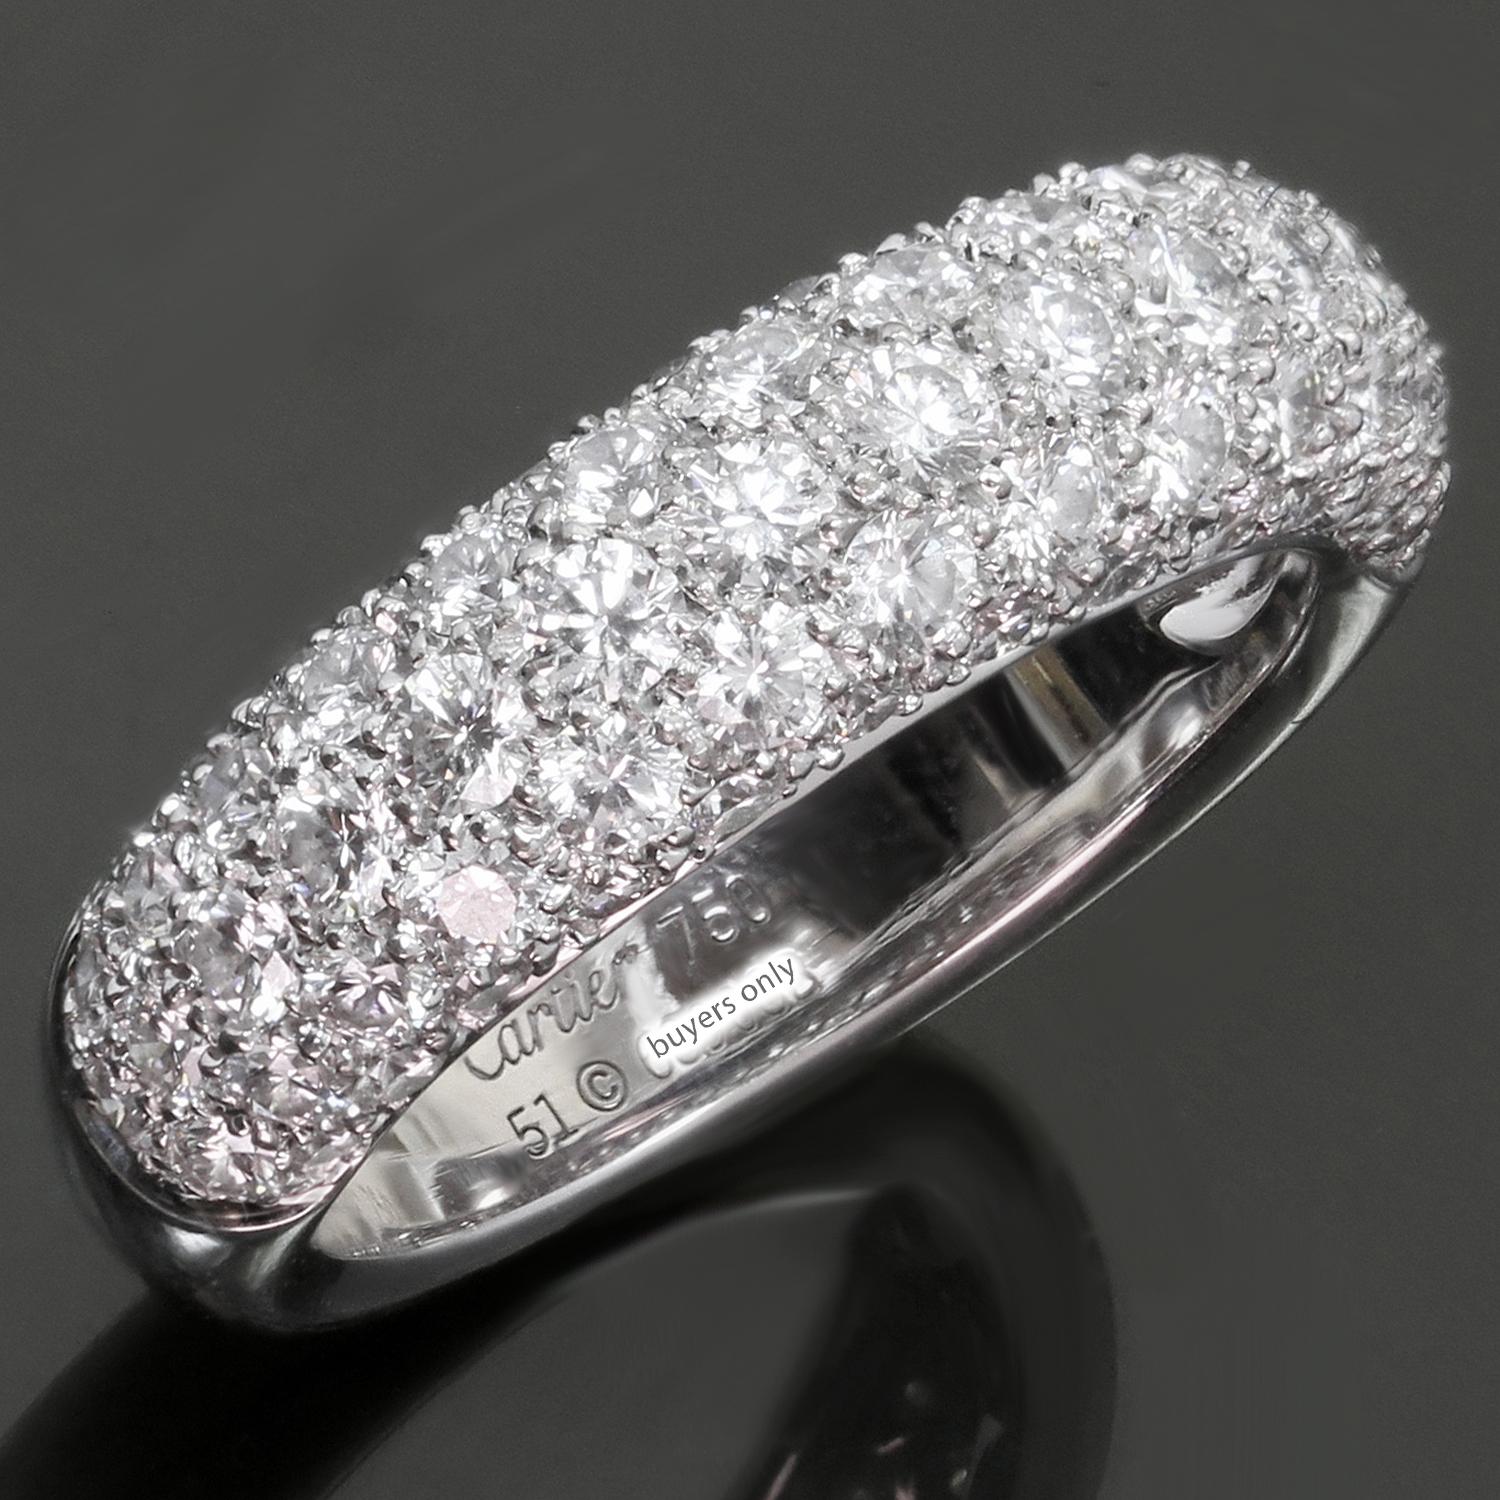 This gorgeous authentic vintage Cartier ring is crafted in 18k white gold and pave-set with approximately 70 round brilliant D-E-F VVS1-VVS2 diamonds weighing an estimated 1.40 carats. Made in France circa 1990s. Measurements: 0.23